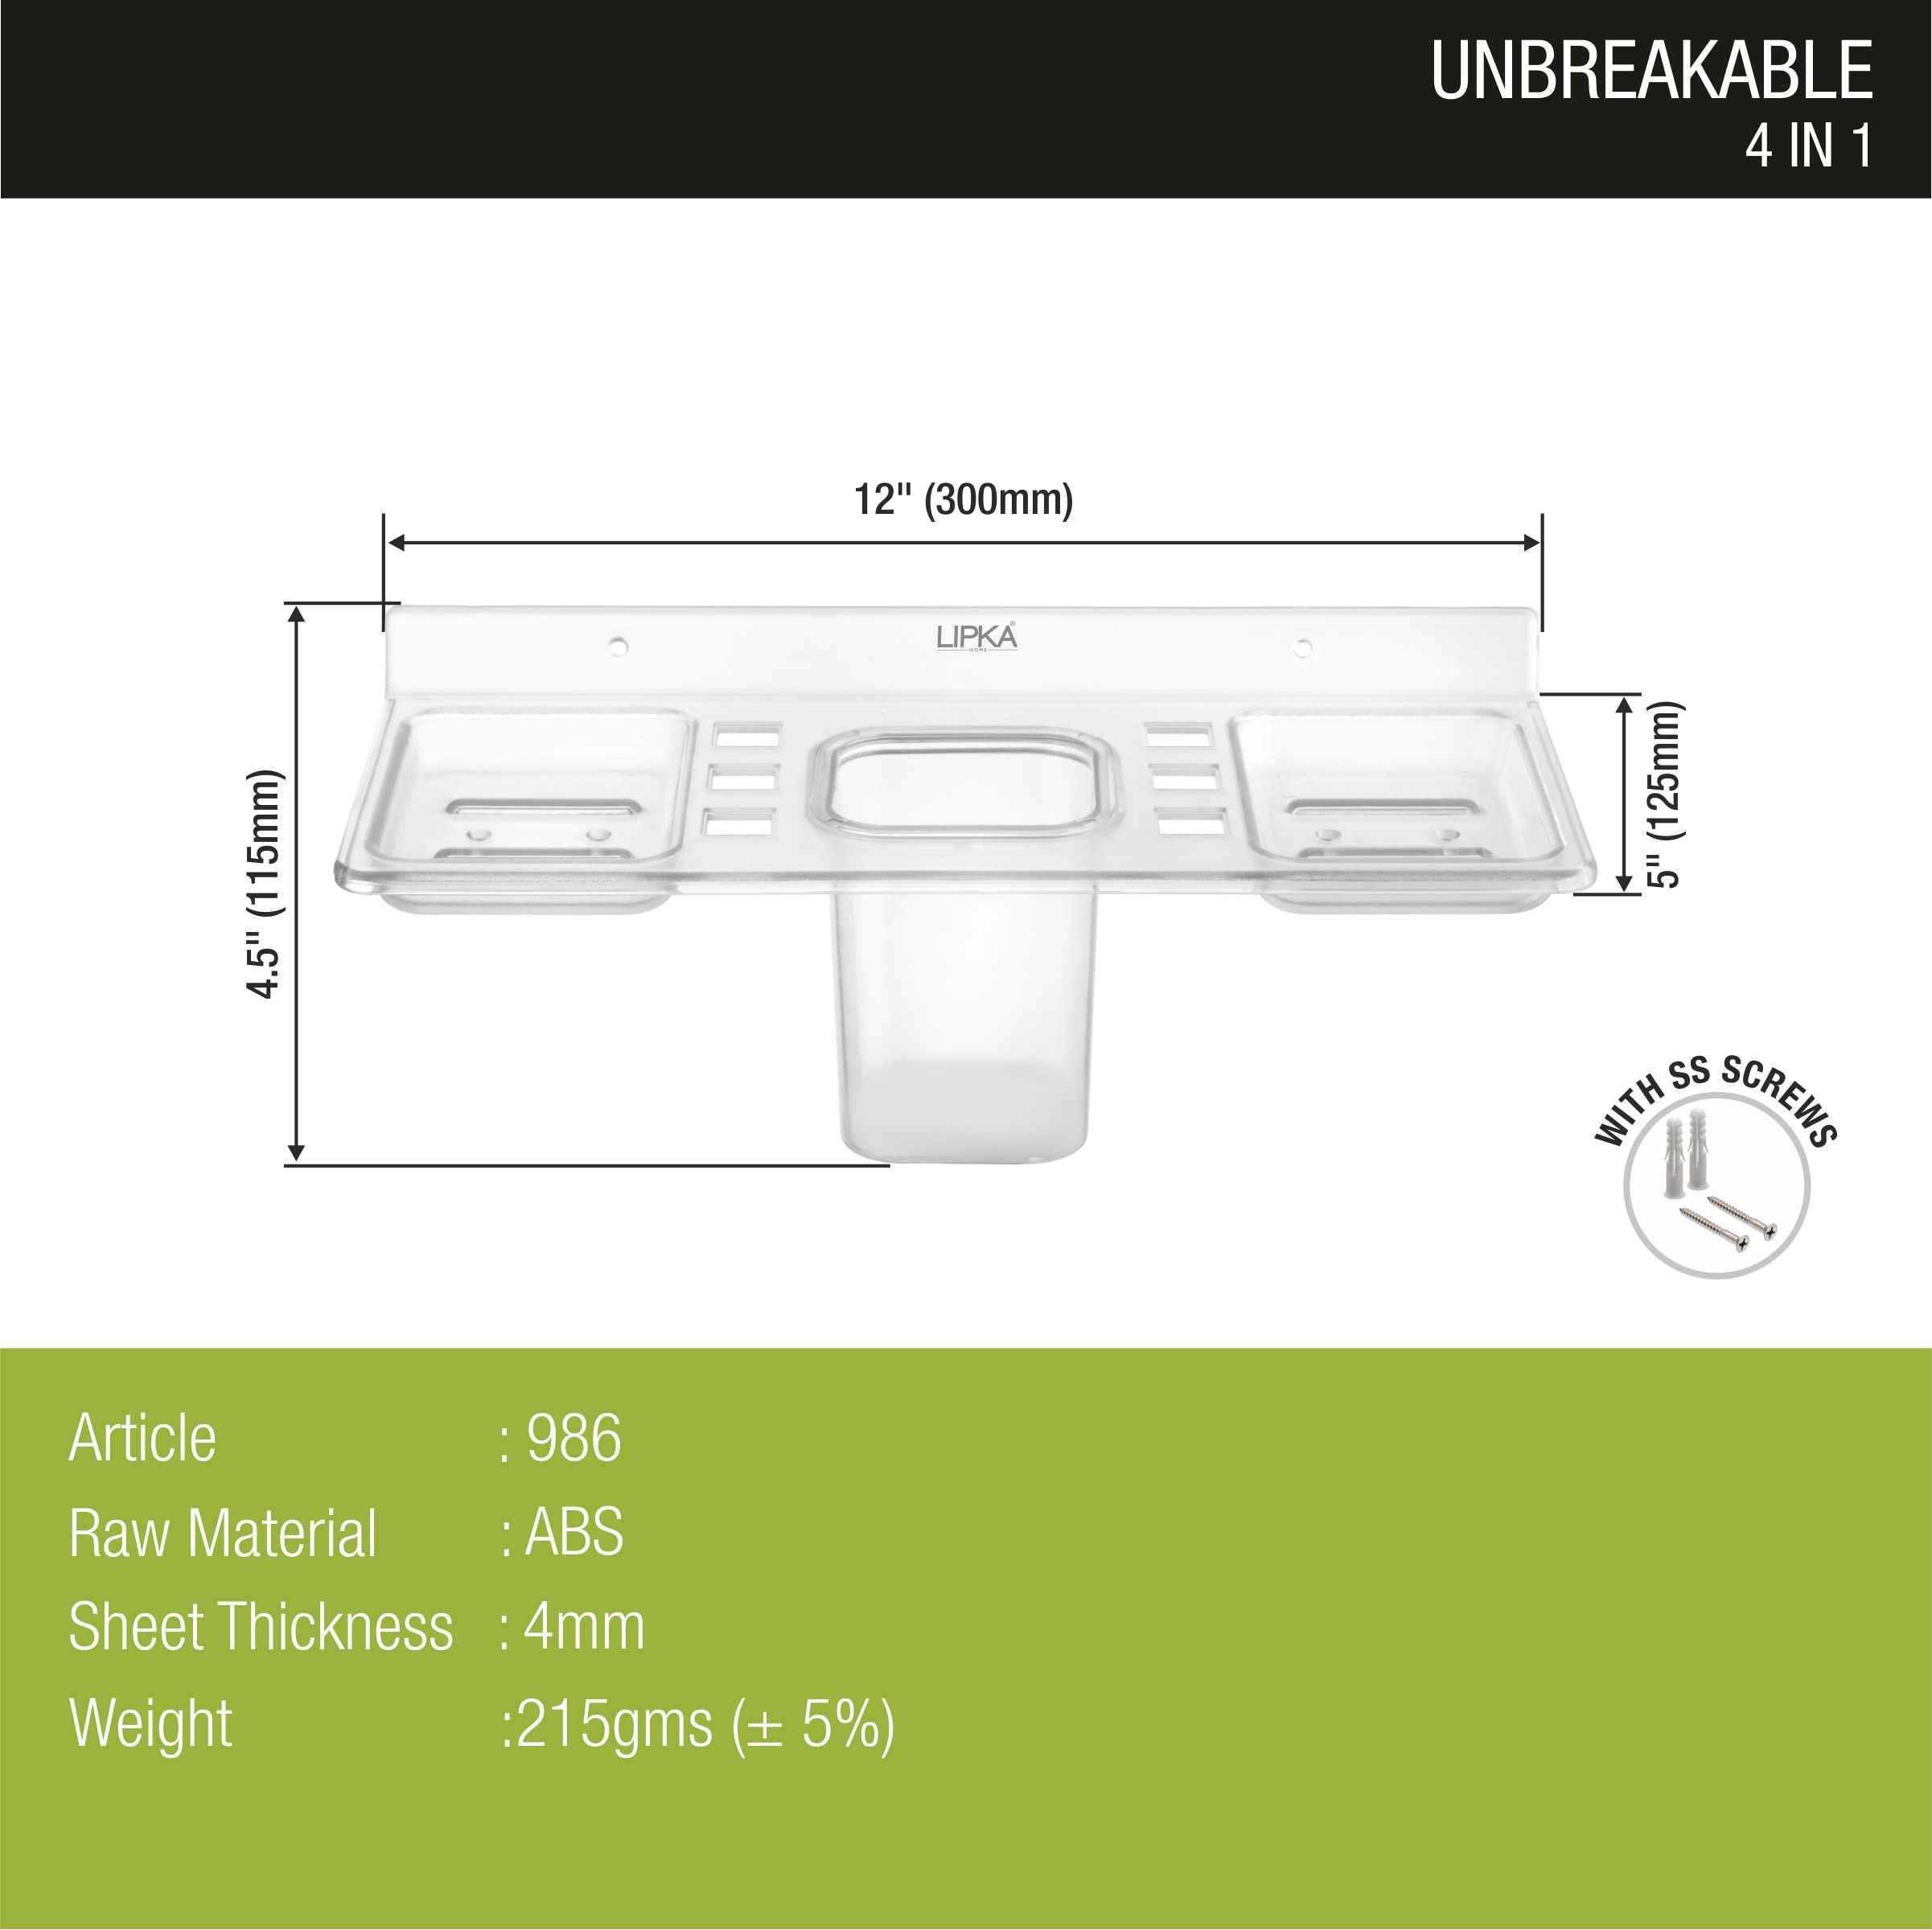 4-in-1 Shelf Tray (Tumbler, Toothbrush Holder & 2 Soap Dishes ) dimensions and sizes